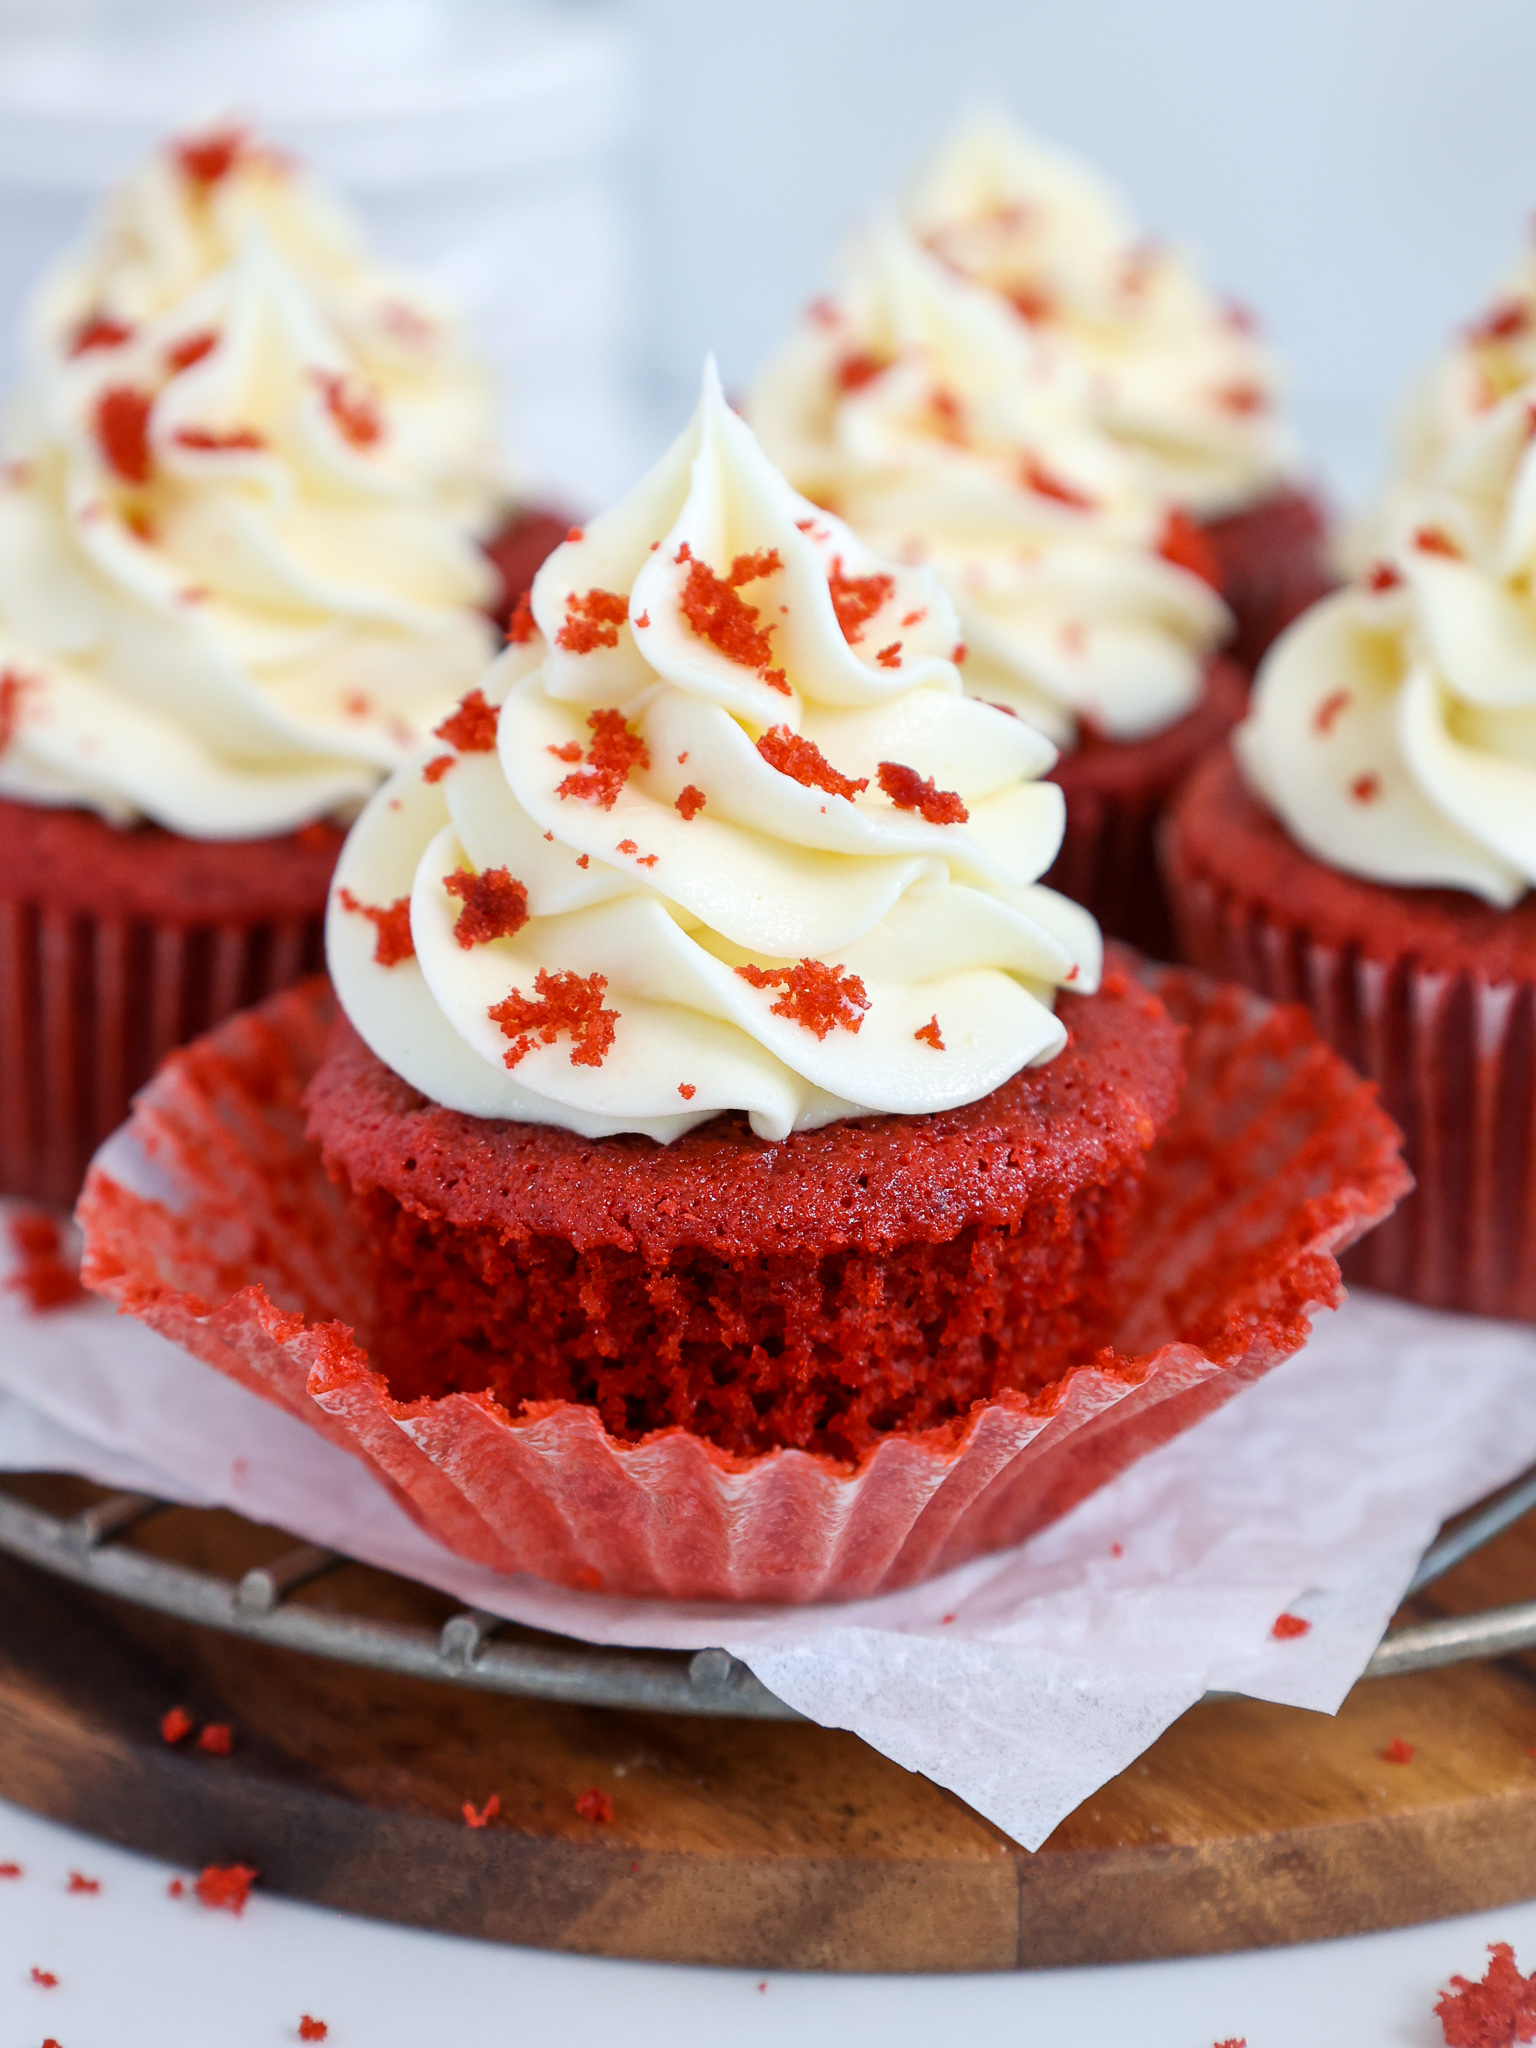 https://chelsweets.com/wp-content/uploads/2022/07/unwrapped-finished-red-velvet-cupcakesv1.jpg